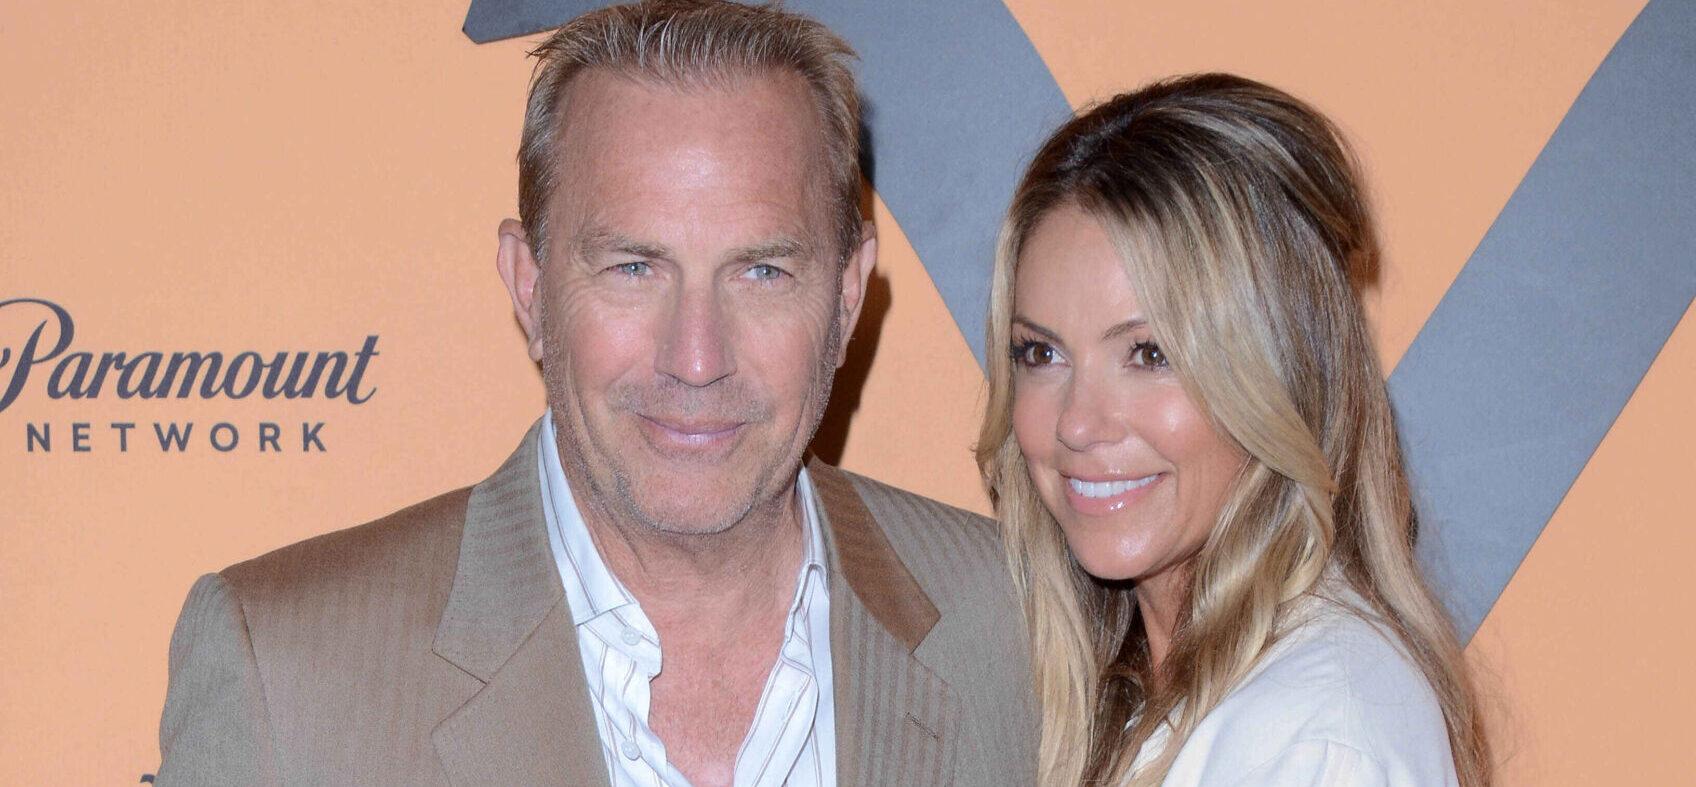 Kevin Costner’s Ex-Wife ‘Not Surprised’ Actor Has ‘Moved On So Quickly’ With Singer Jewel